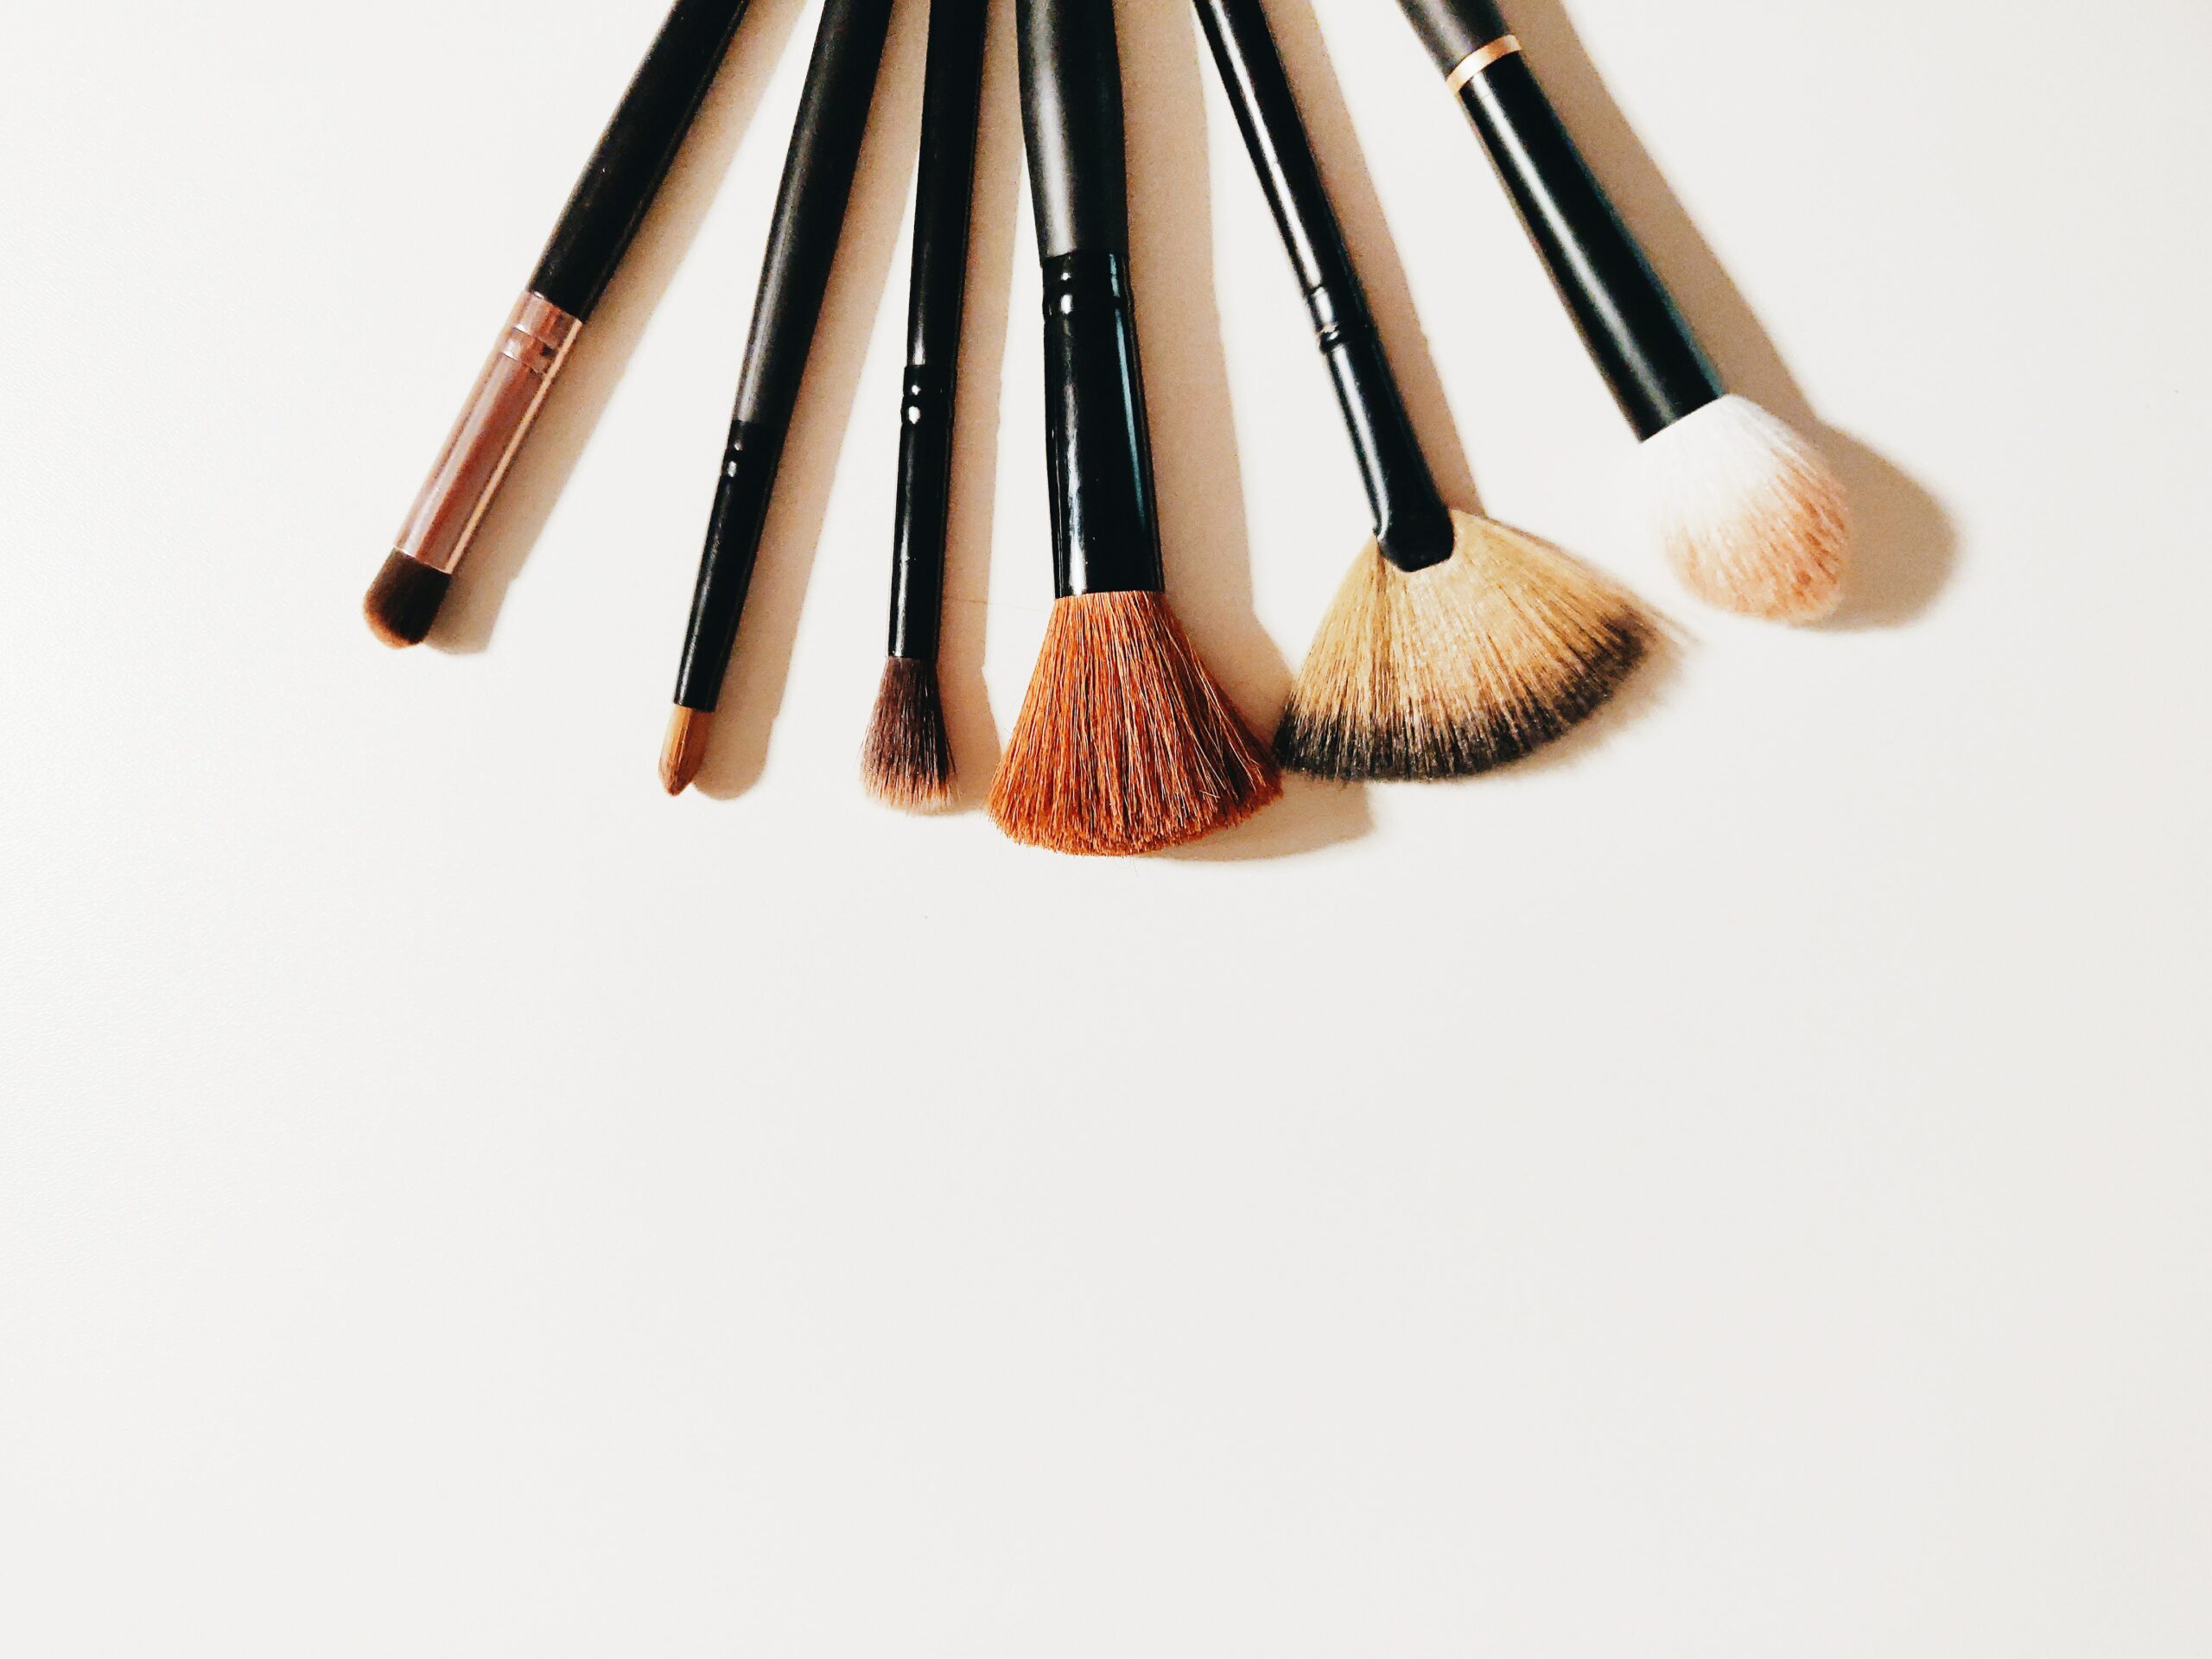 How to Clean Makeup Brushes at Home – 3 Easy Steps